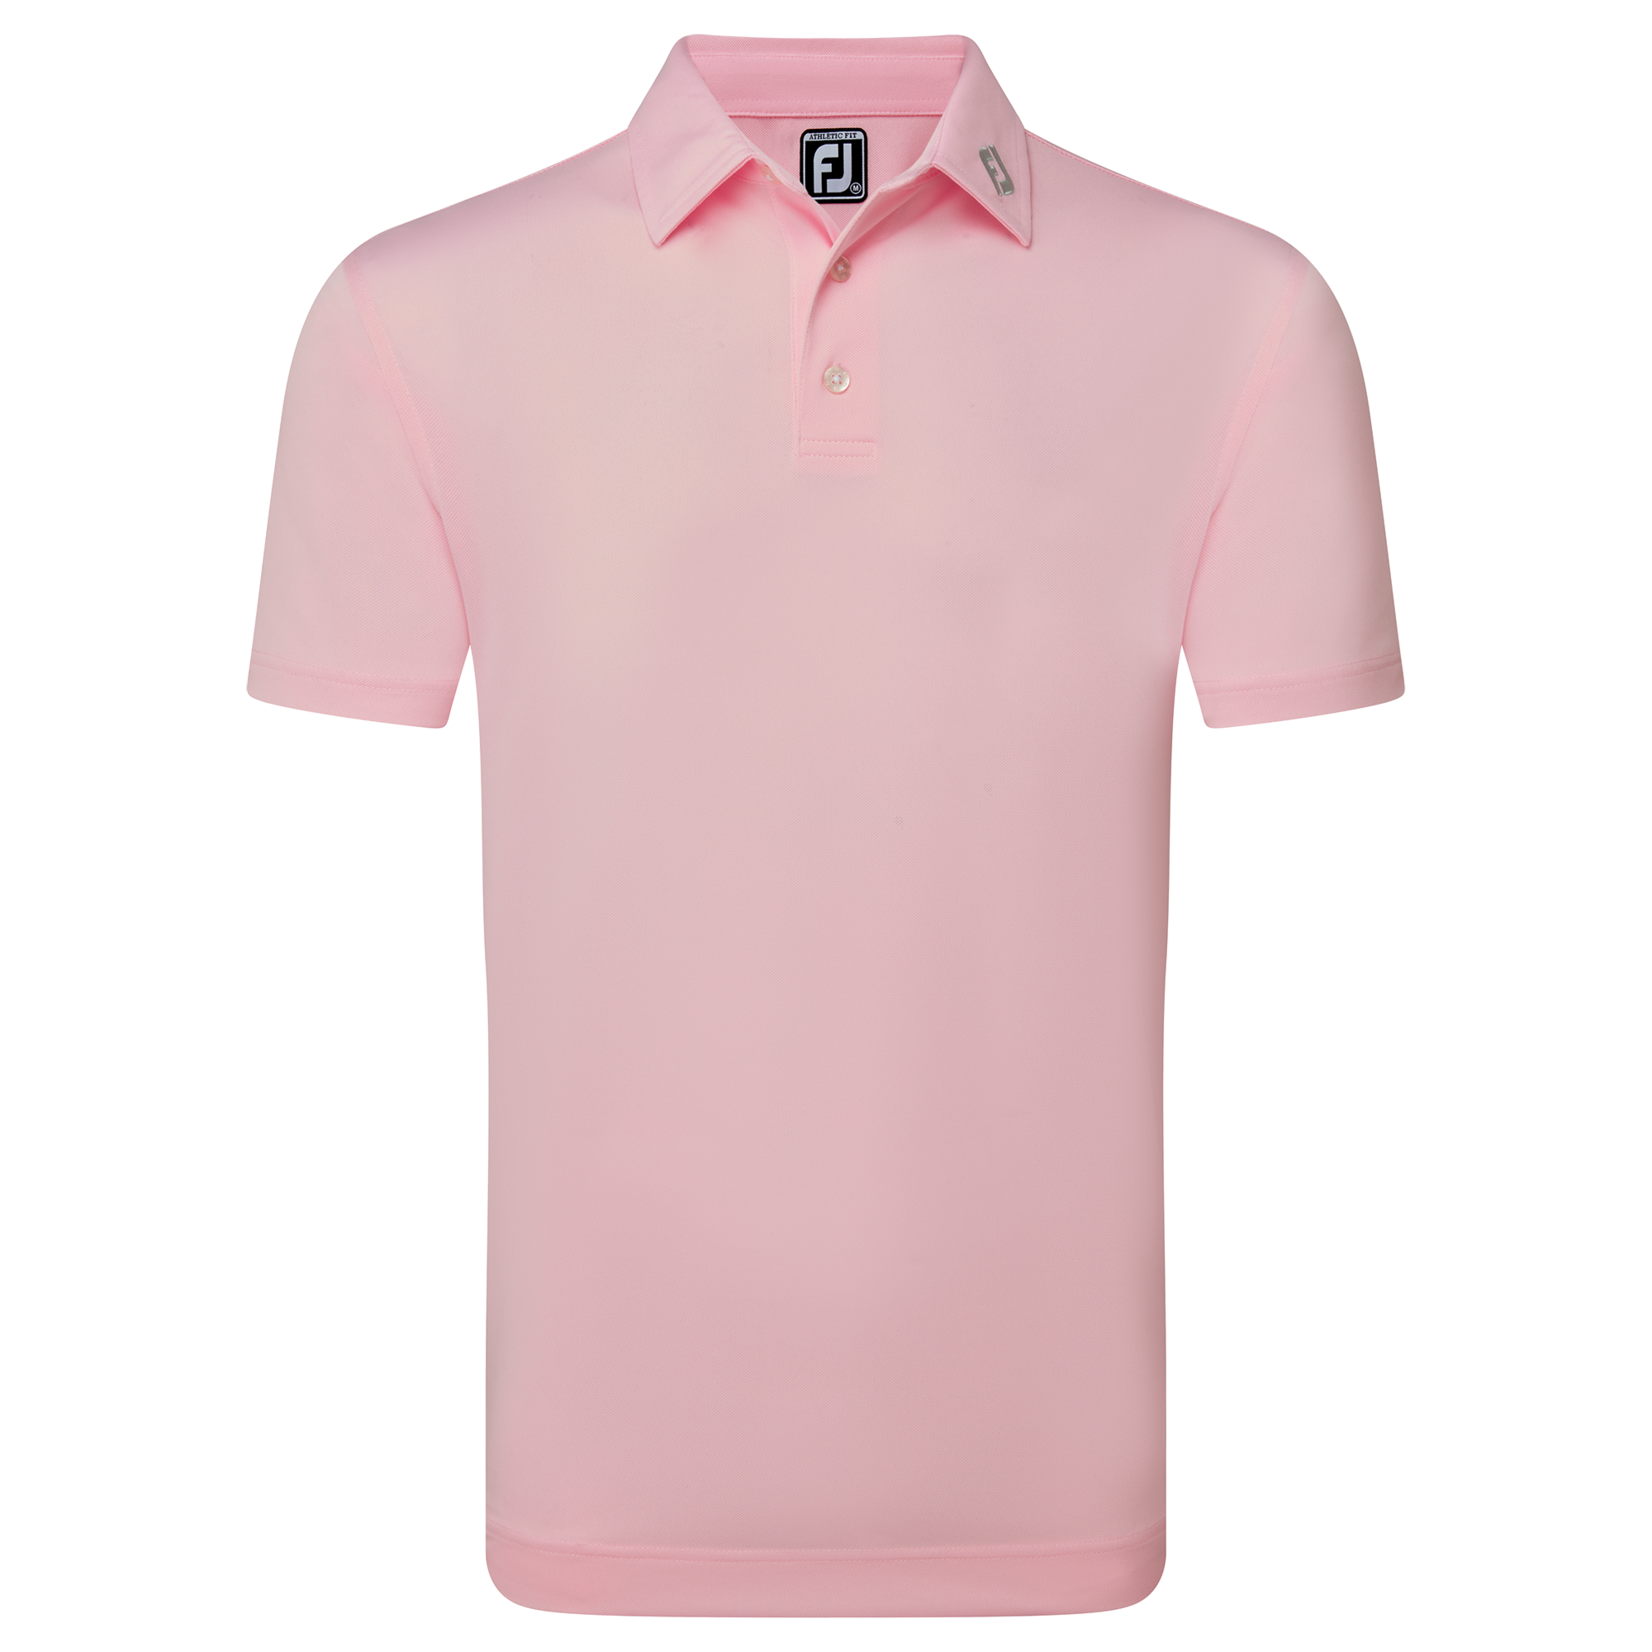 Footjoy Footjoy Stretch Pique Solid Polo - Light Pink